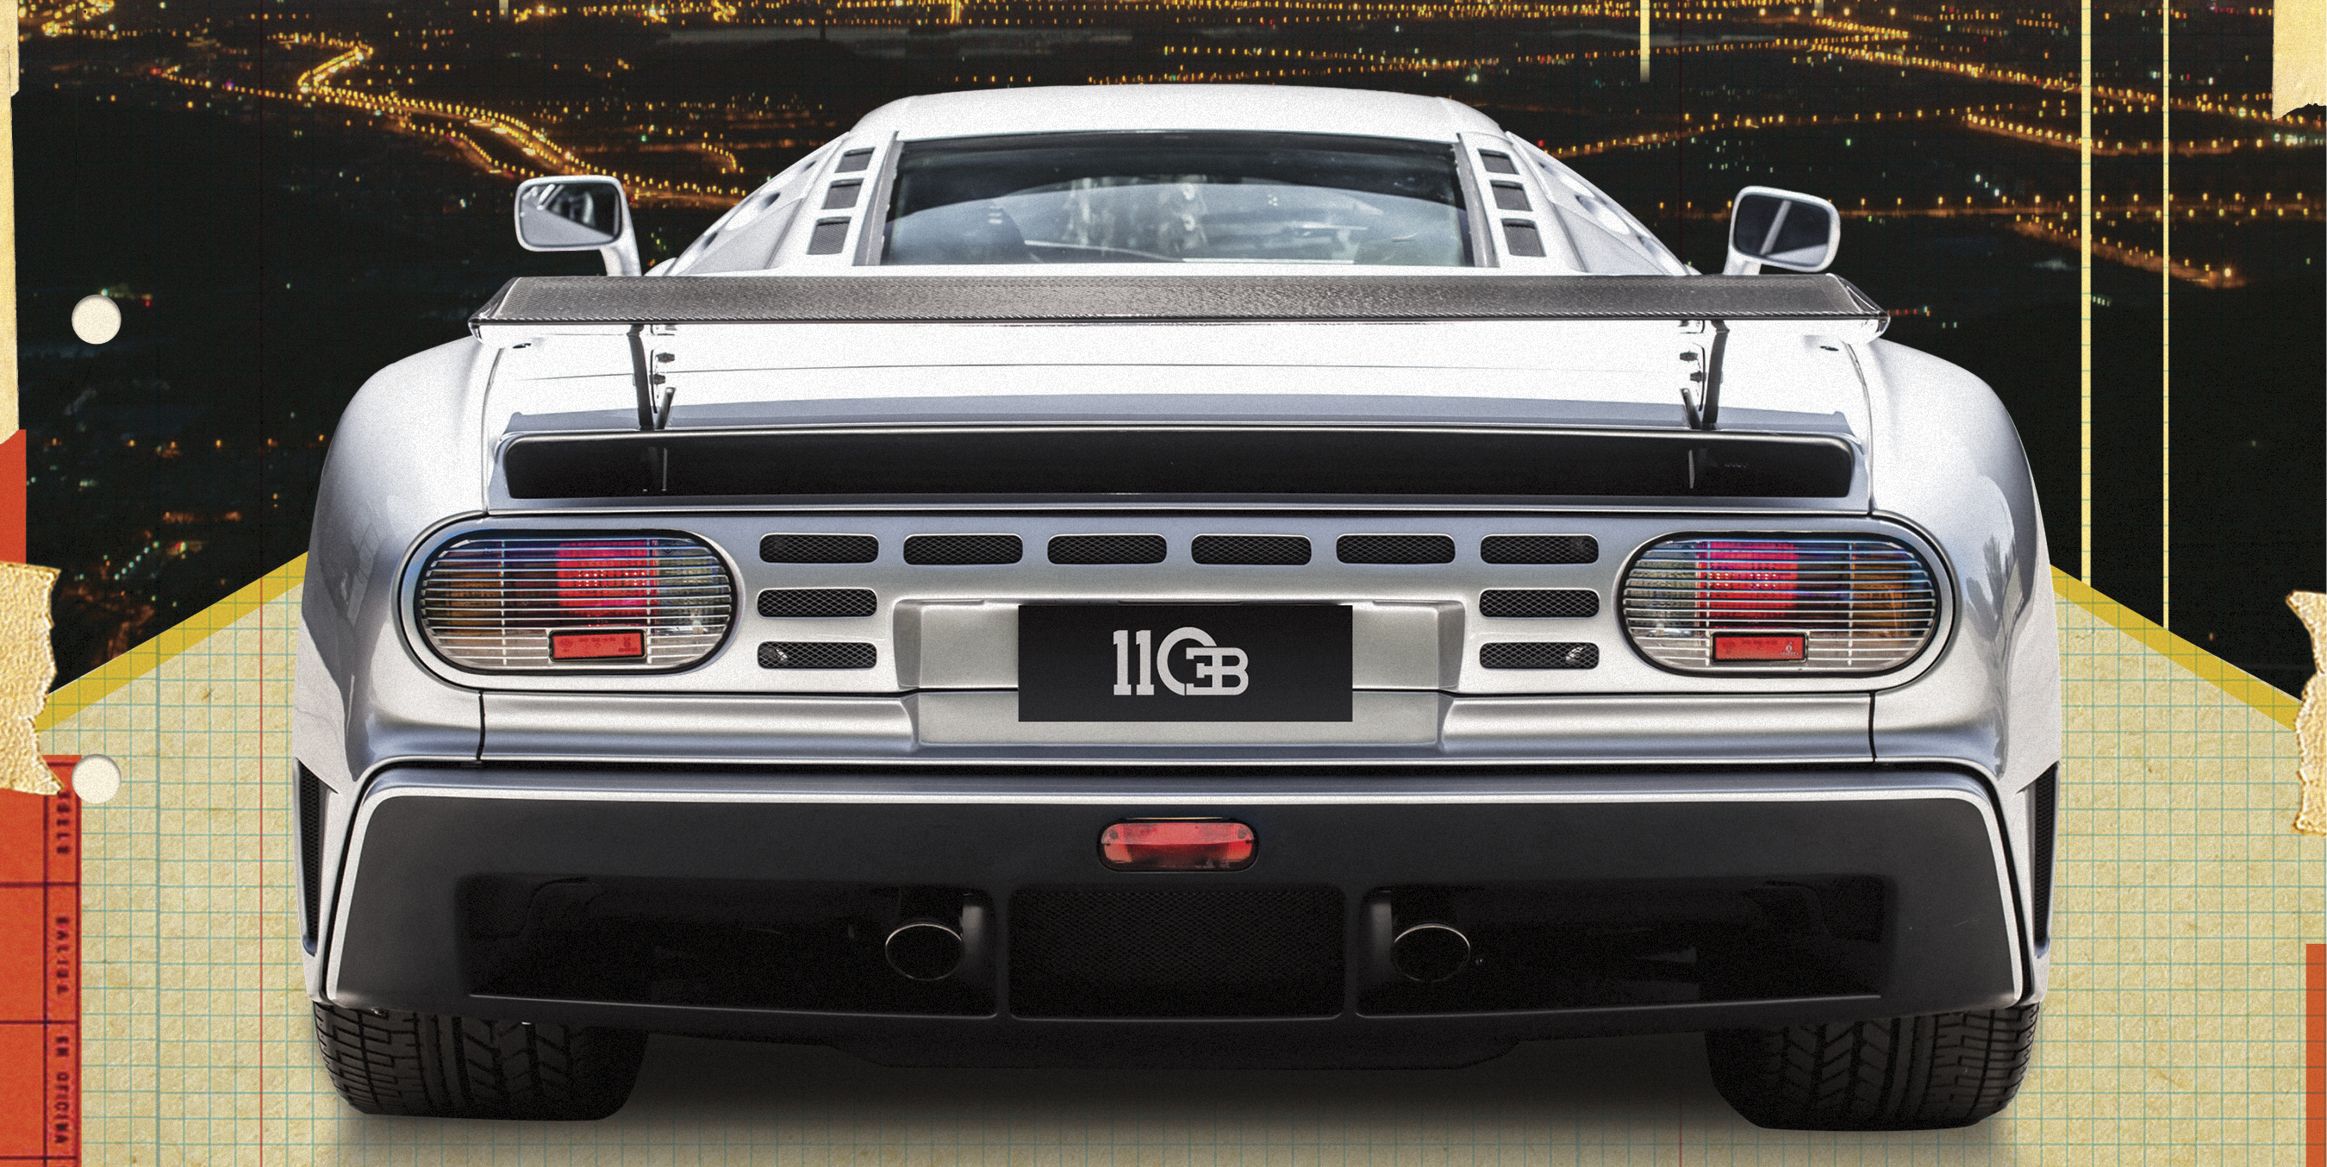 Bugatti EB110: The First Modern Hypercar Is 30 Years Old